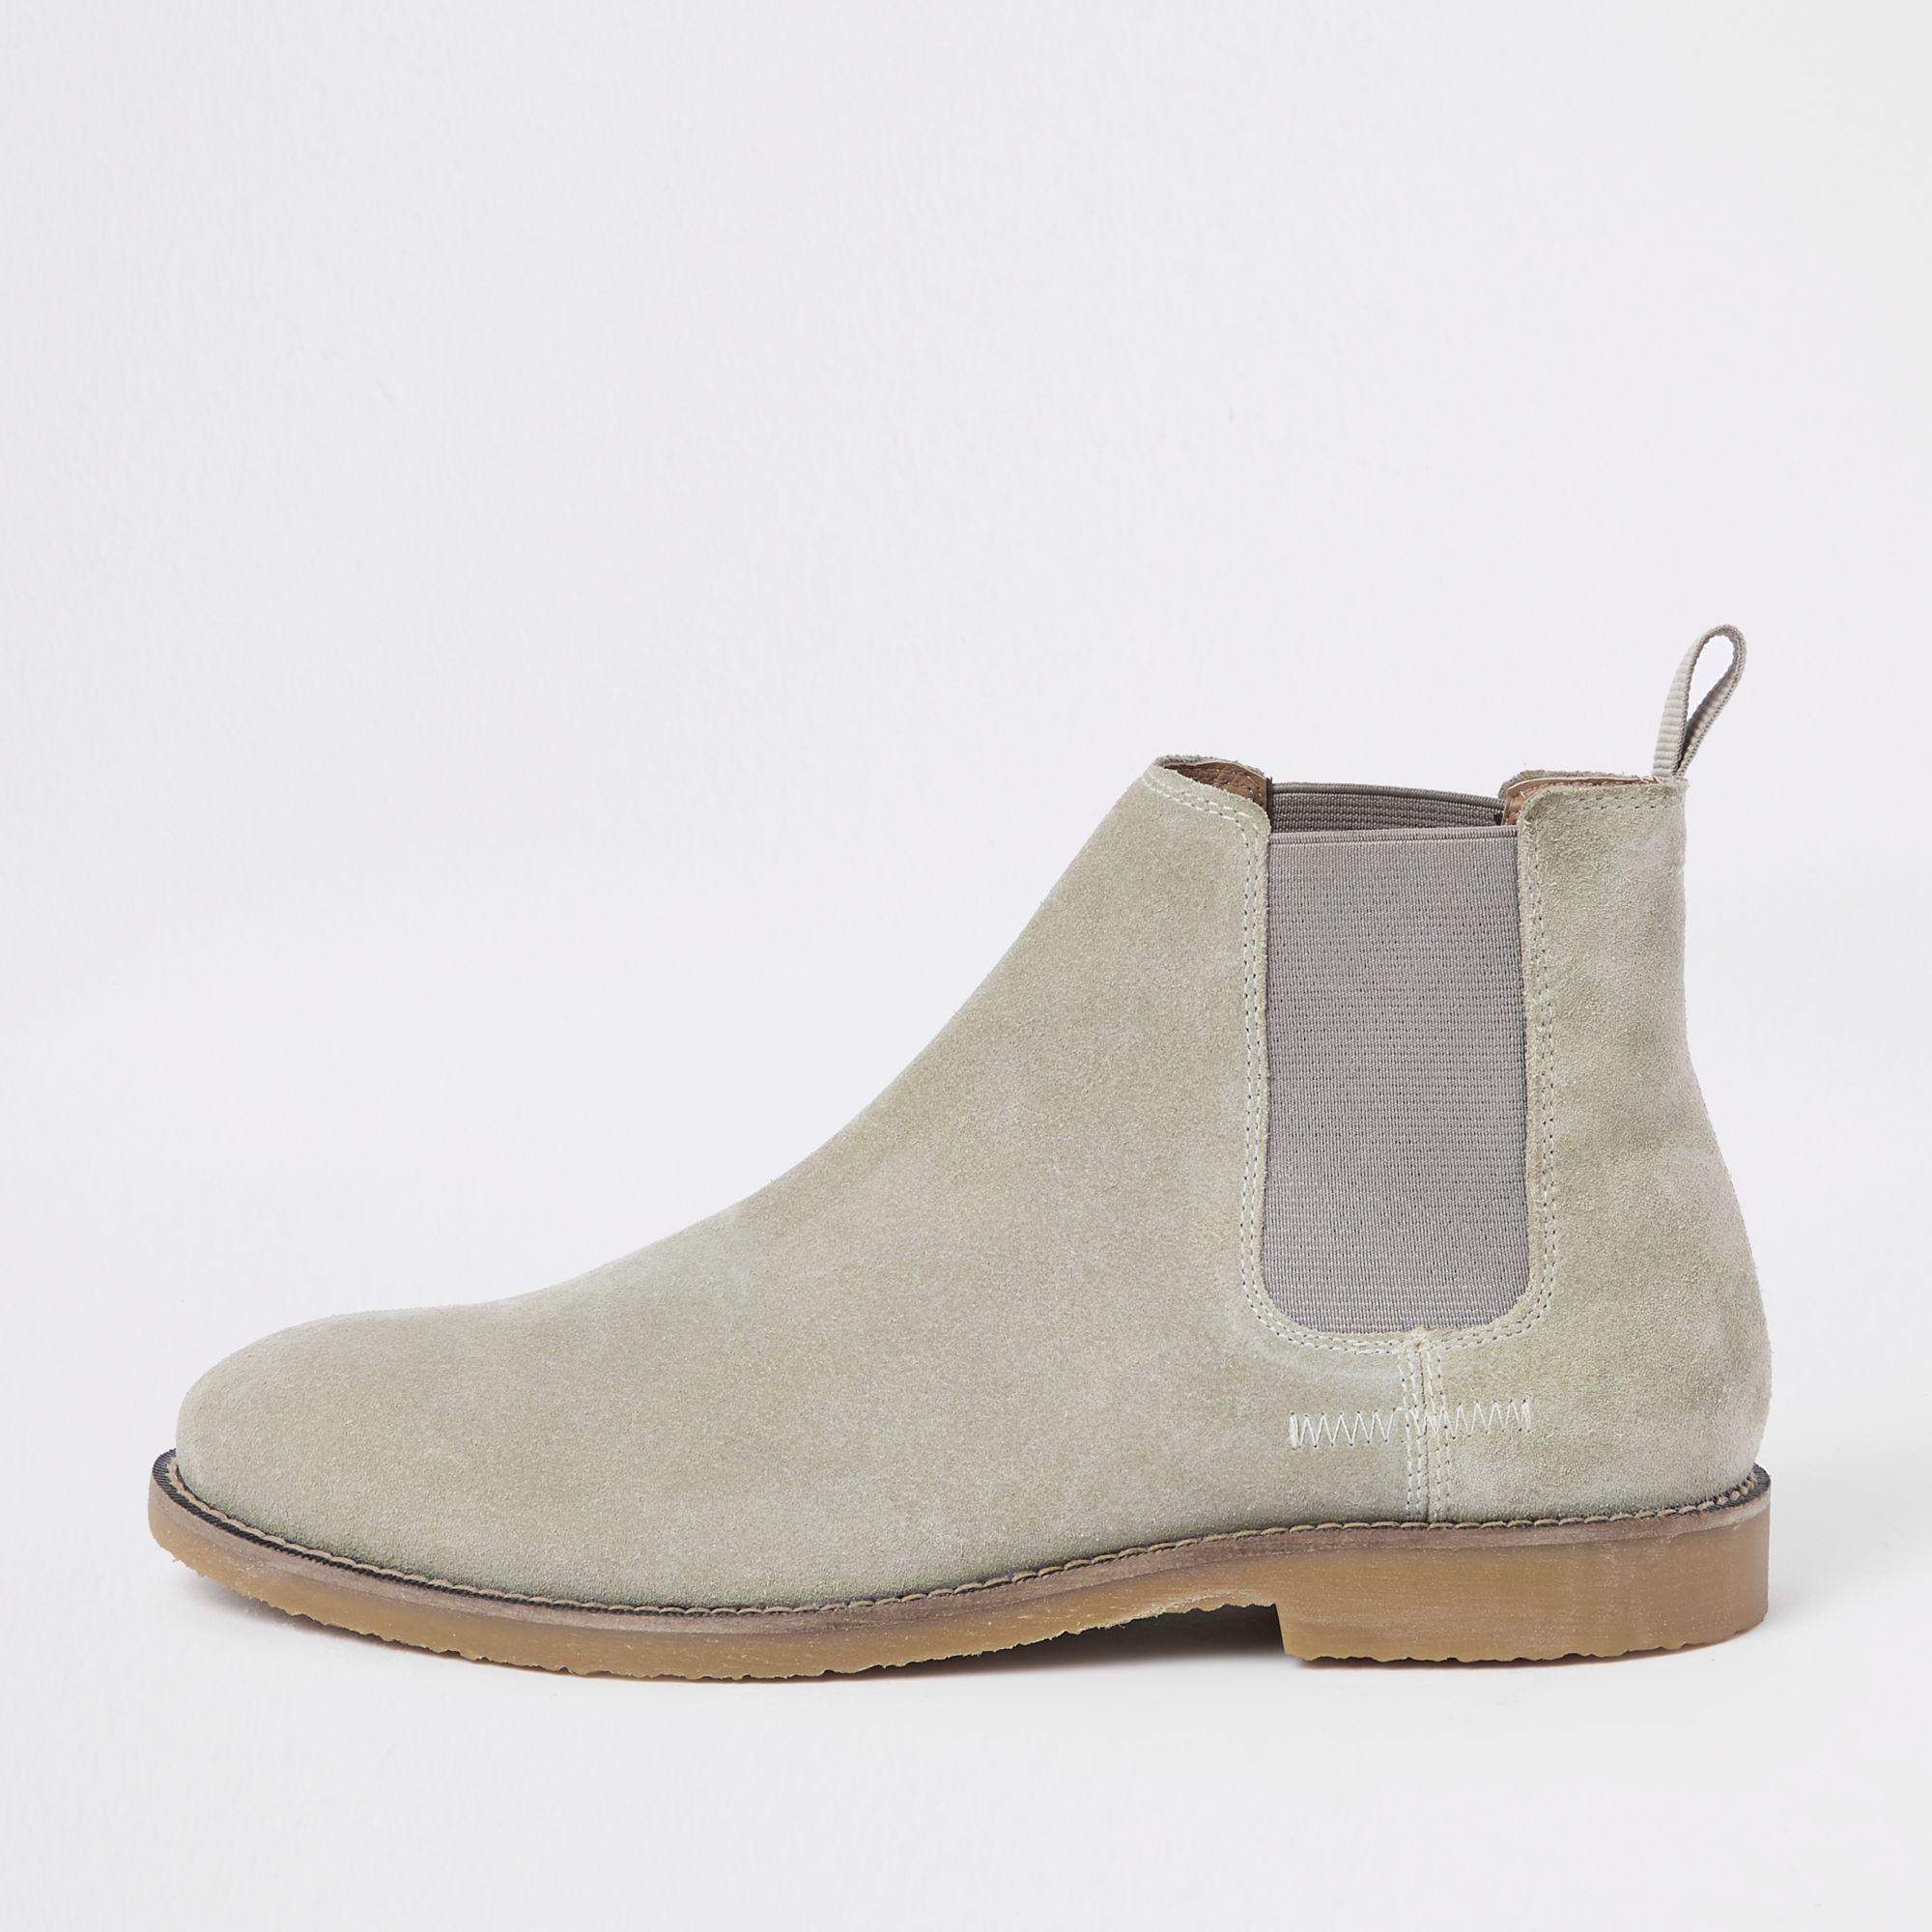 Lyst - River Island Stone Suede Chelsea Boot in Gray for Men